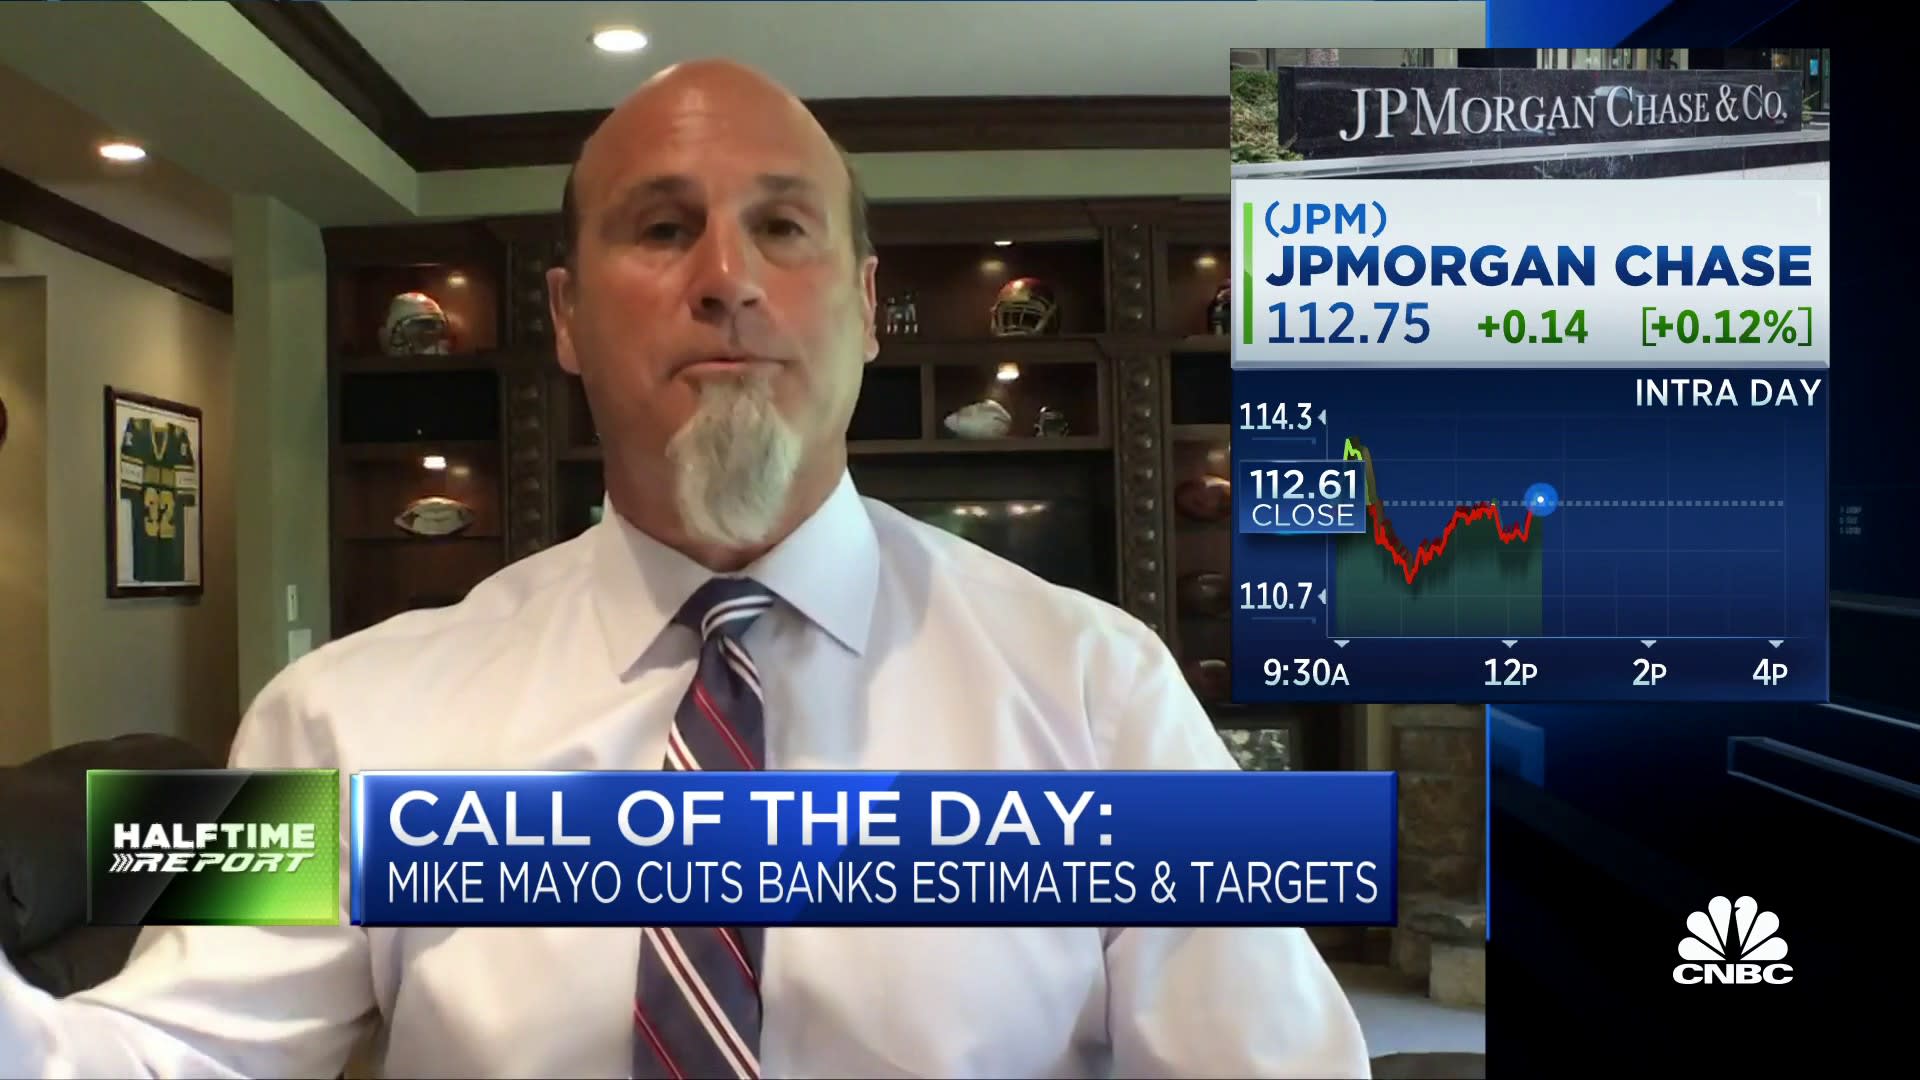 Now is the time to own JPMorgan, says MarketRebellion's Pete Najarian